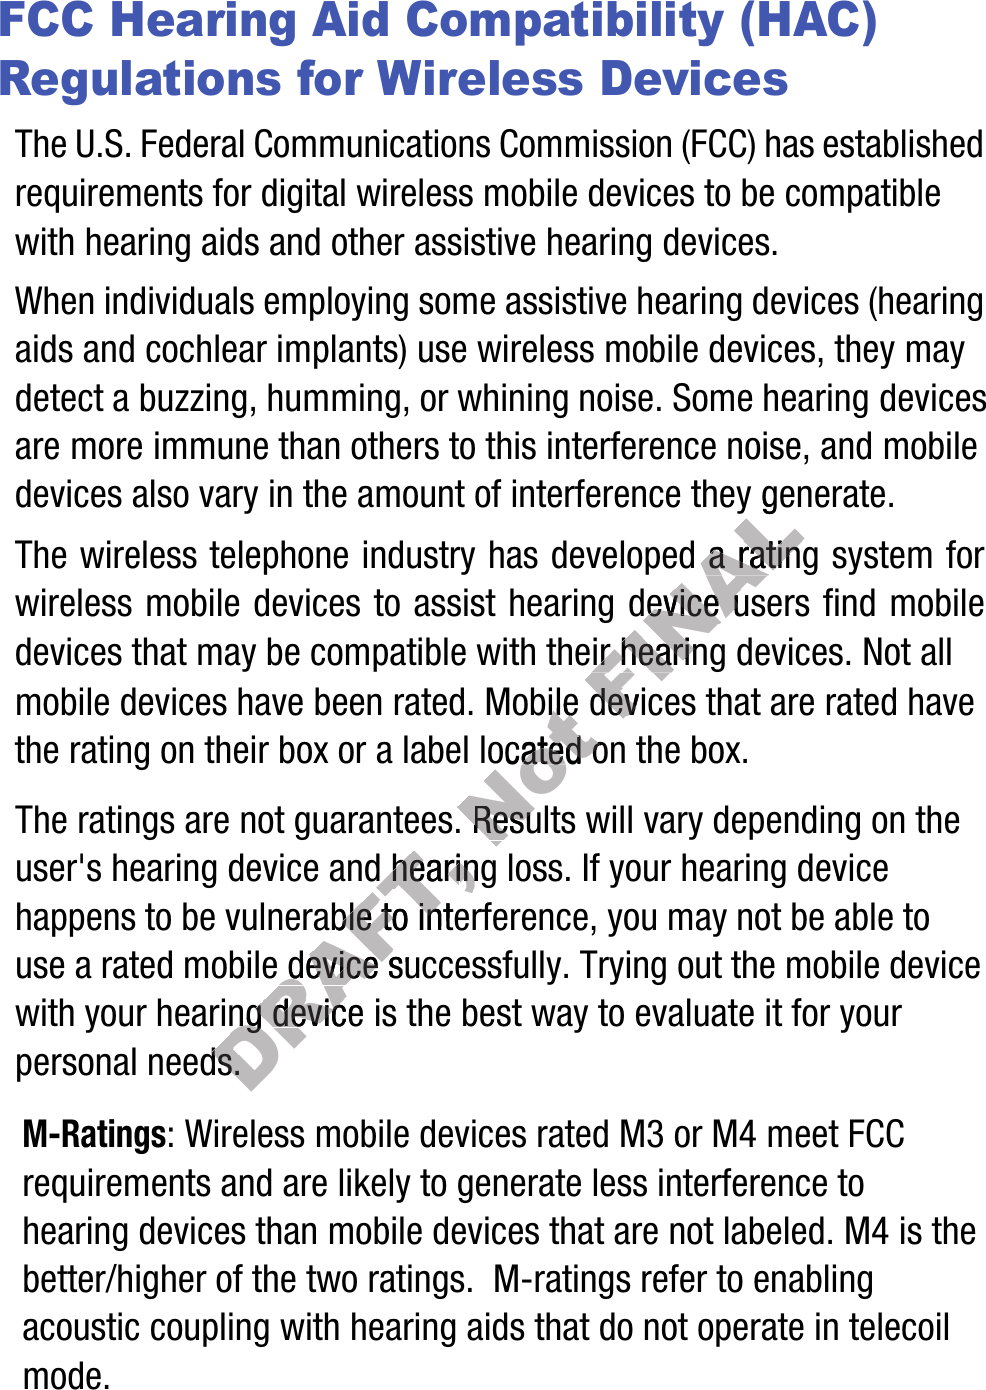 FCC Hearing Aid Compatibility (HAC) Regulations for Wireless DevicesThe U.S. Federal Communications Commission (FCC) has established requirements for digital wireless mobile devices to be compatible with hearing aids and other assistive hearing devices.When individuals employing some assistive hearing devices (hearing aids and cochlear implants) use wireless mobile devices, they may detect a buzzing, humming, or whining noise. Some hearing devices are more immune than others to this interference noise, and mobile devices also vary in the amount of interference they generate.The wireless telephone industry has developed a rating system for wireless mobile devices to assist hearing device users find mobile devices that may be compatible with their hearing devices. Not all mobile devices have been rated. Mobile devices that are rated have the rating on their box or a label located on the box.The ratings are not guarantees. Results will vary depending on the user&apos;s hearing device and hearing loss. If your hearing device happens to be vulnerable to interference, you may not be able to use a rated mobile device successfully. Trying out the mobile device with your hearing device is the best way to evaluate it for your personal needs.M-Ratings: Wireless mobile devices rated M3 or M4 meet FCC requirements and are likely to generate less interference to hearing devices than mobile devices that are not labeled. M4 is the better/higher of the two ratings.  M-ratings refer to enabling acoustic coupling with hearing aids that do not operate in telecoil mode.DRAFT, The ratings are not guarantees. user&apos;s hearing device and heariuser&apos;s hearing device and hearing ng be vulnerable to interfbe vulnerable to interfmobile device successfully. Trmobile device successfully. TrDRAFT,  hearing hearing devic deviceneeds.needs.Not obilebilea label located on thea label located on theThe ratings are not guarantees. The ratings are not guarantees. Results will varyResults will varyFINALthe amount of interference they generate.has developed a rating has developed a rating mobile devices to assist hearing device users find mobile mobile devices to assist hearing device users find mobile with their hearing devices. Not all with their hearing devices. Not all  dev devic